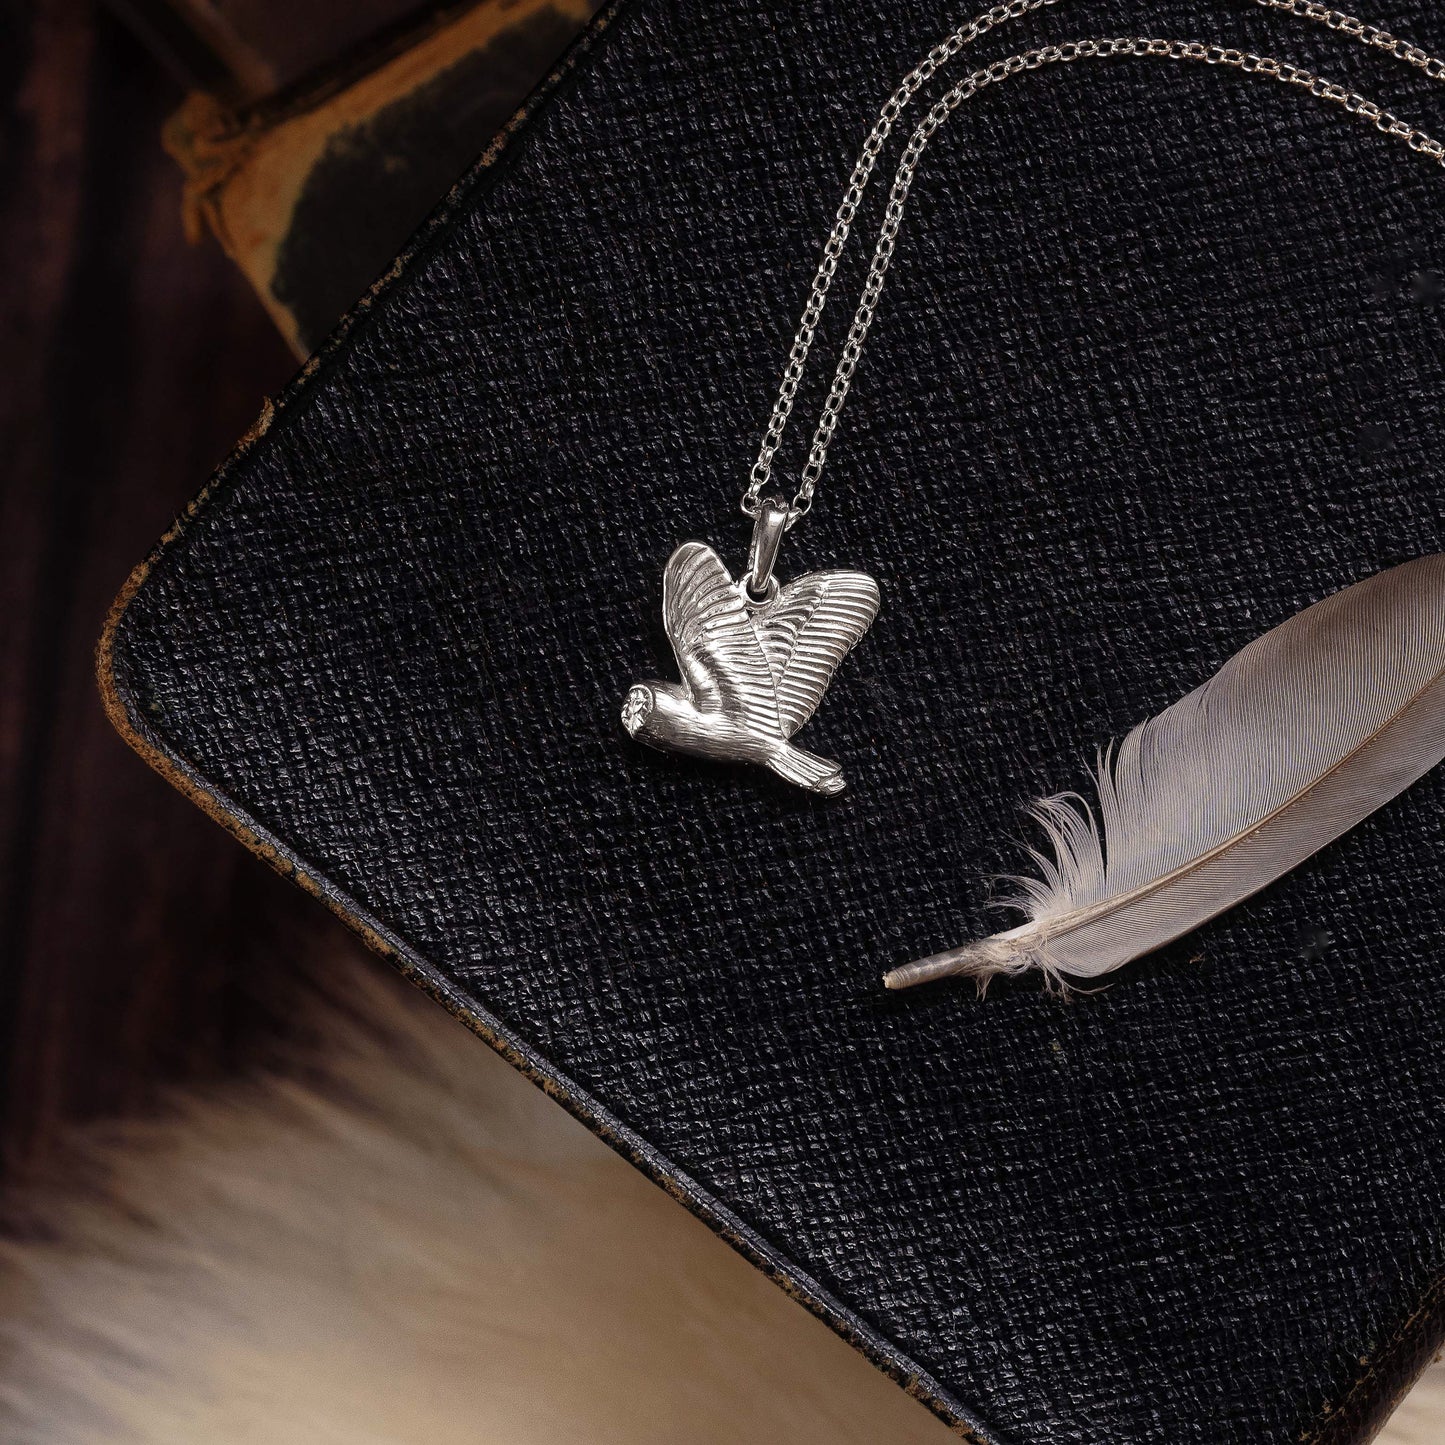 Flying Barn Owl Sterling Silver Necklace